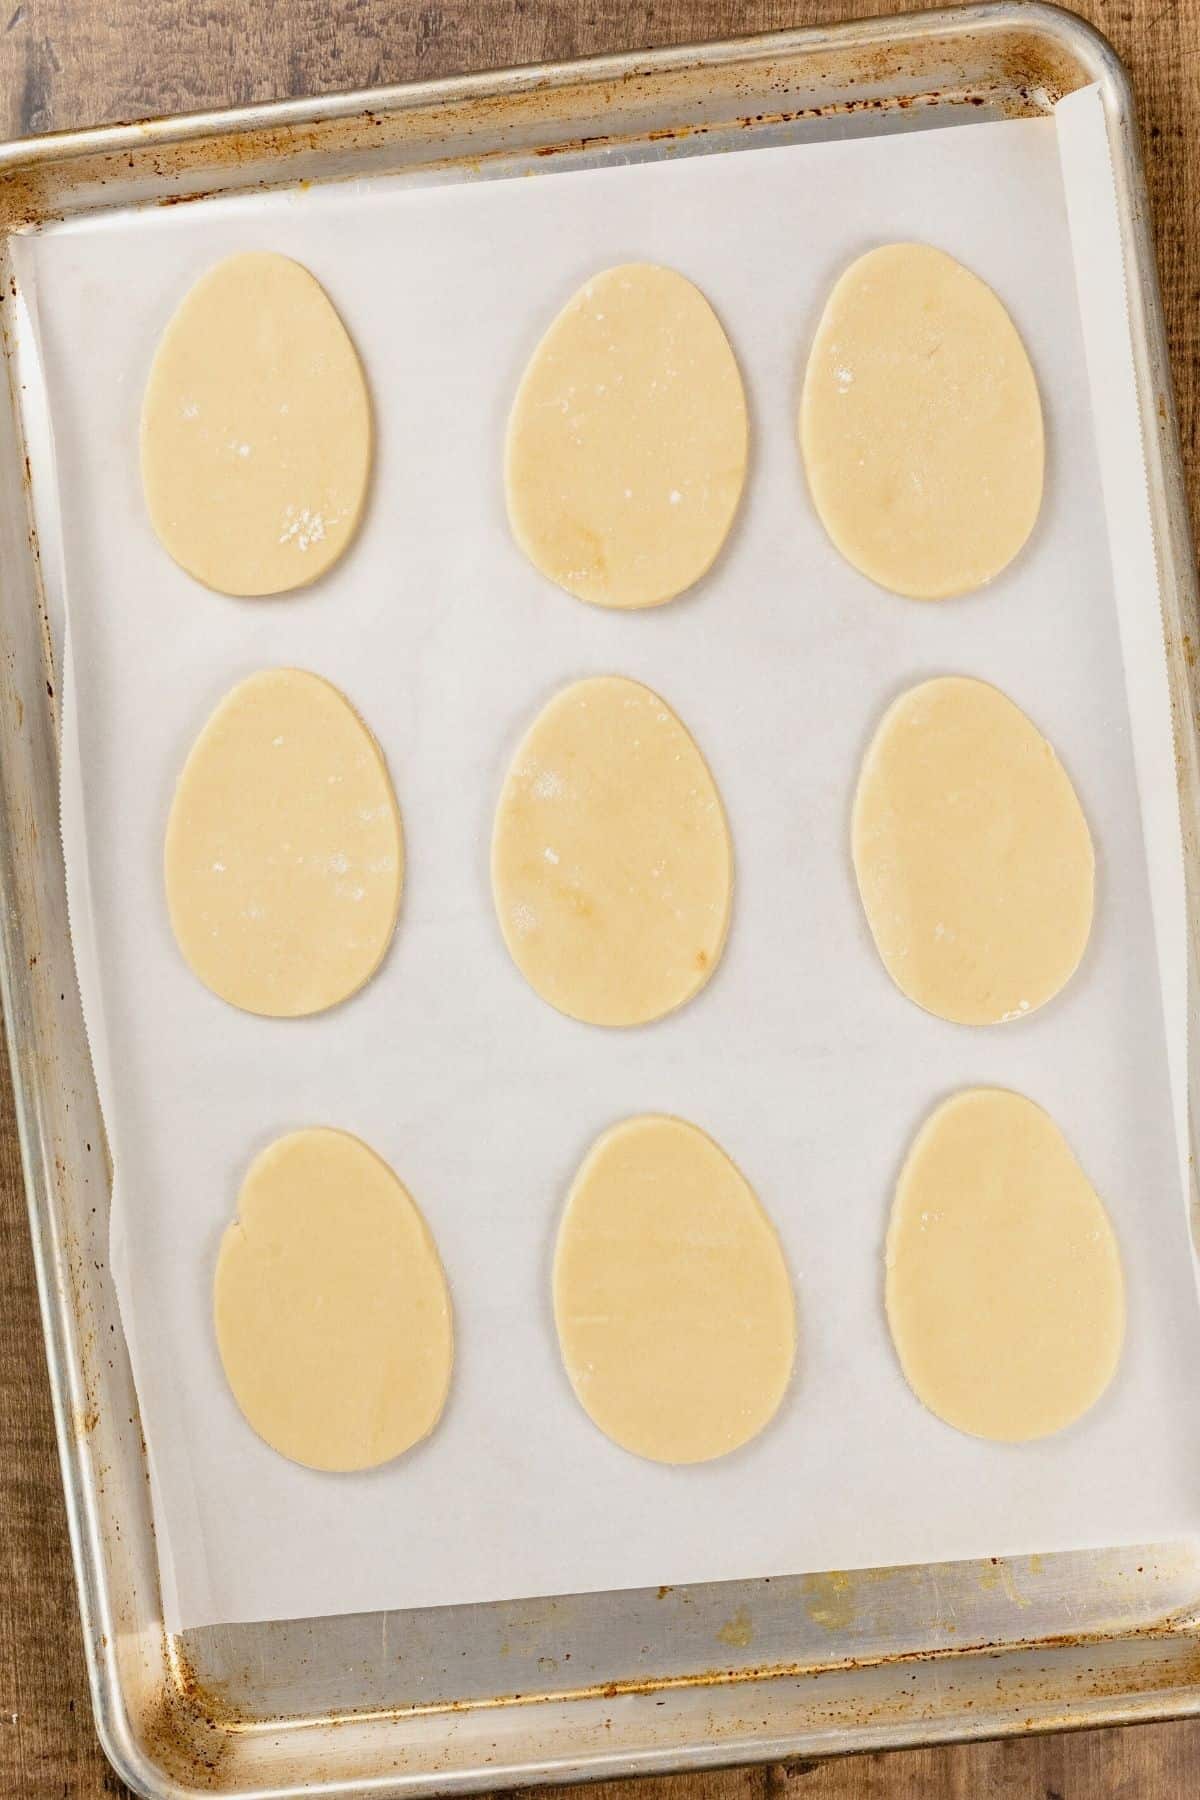 A silver cookie tray with parchment paper and 9 unbaked cookies.